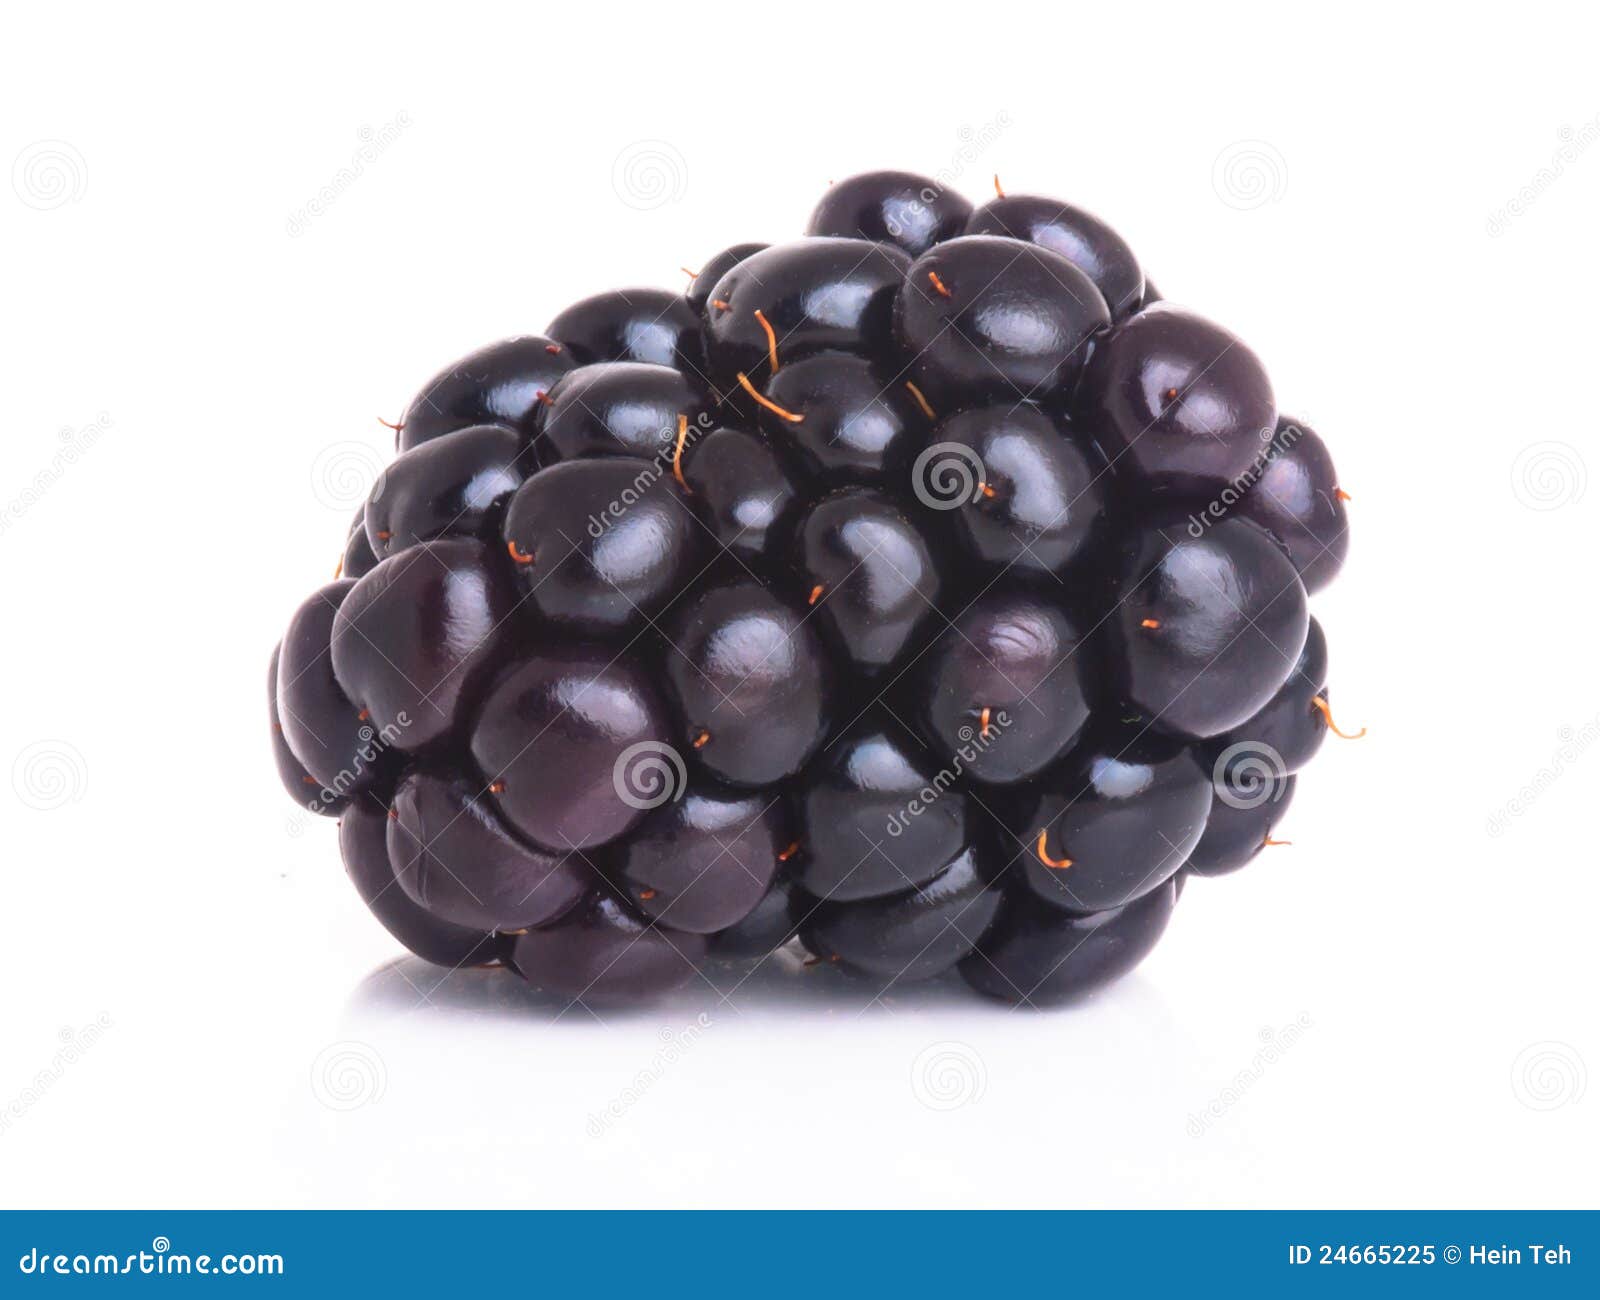 A Blackberry on the White Background Stock Image - Image of delicious ...